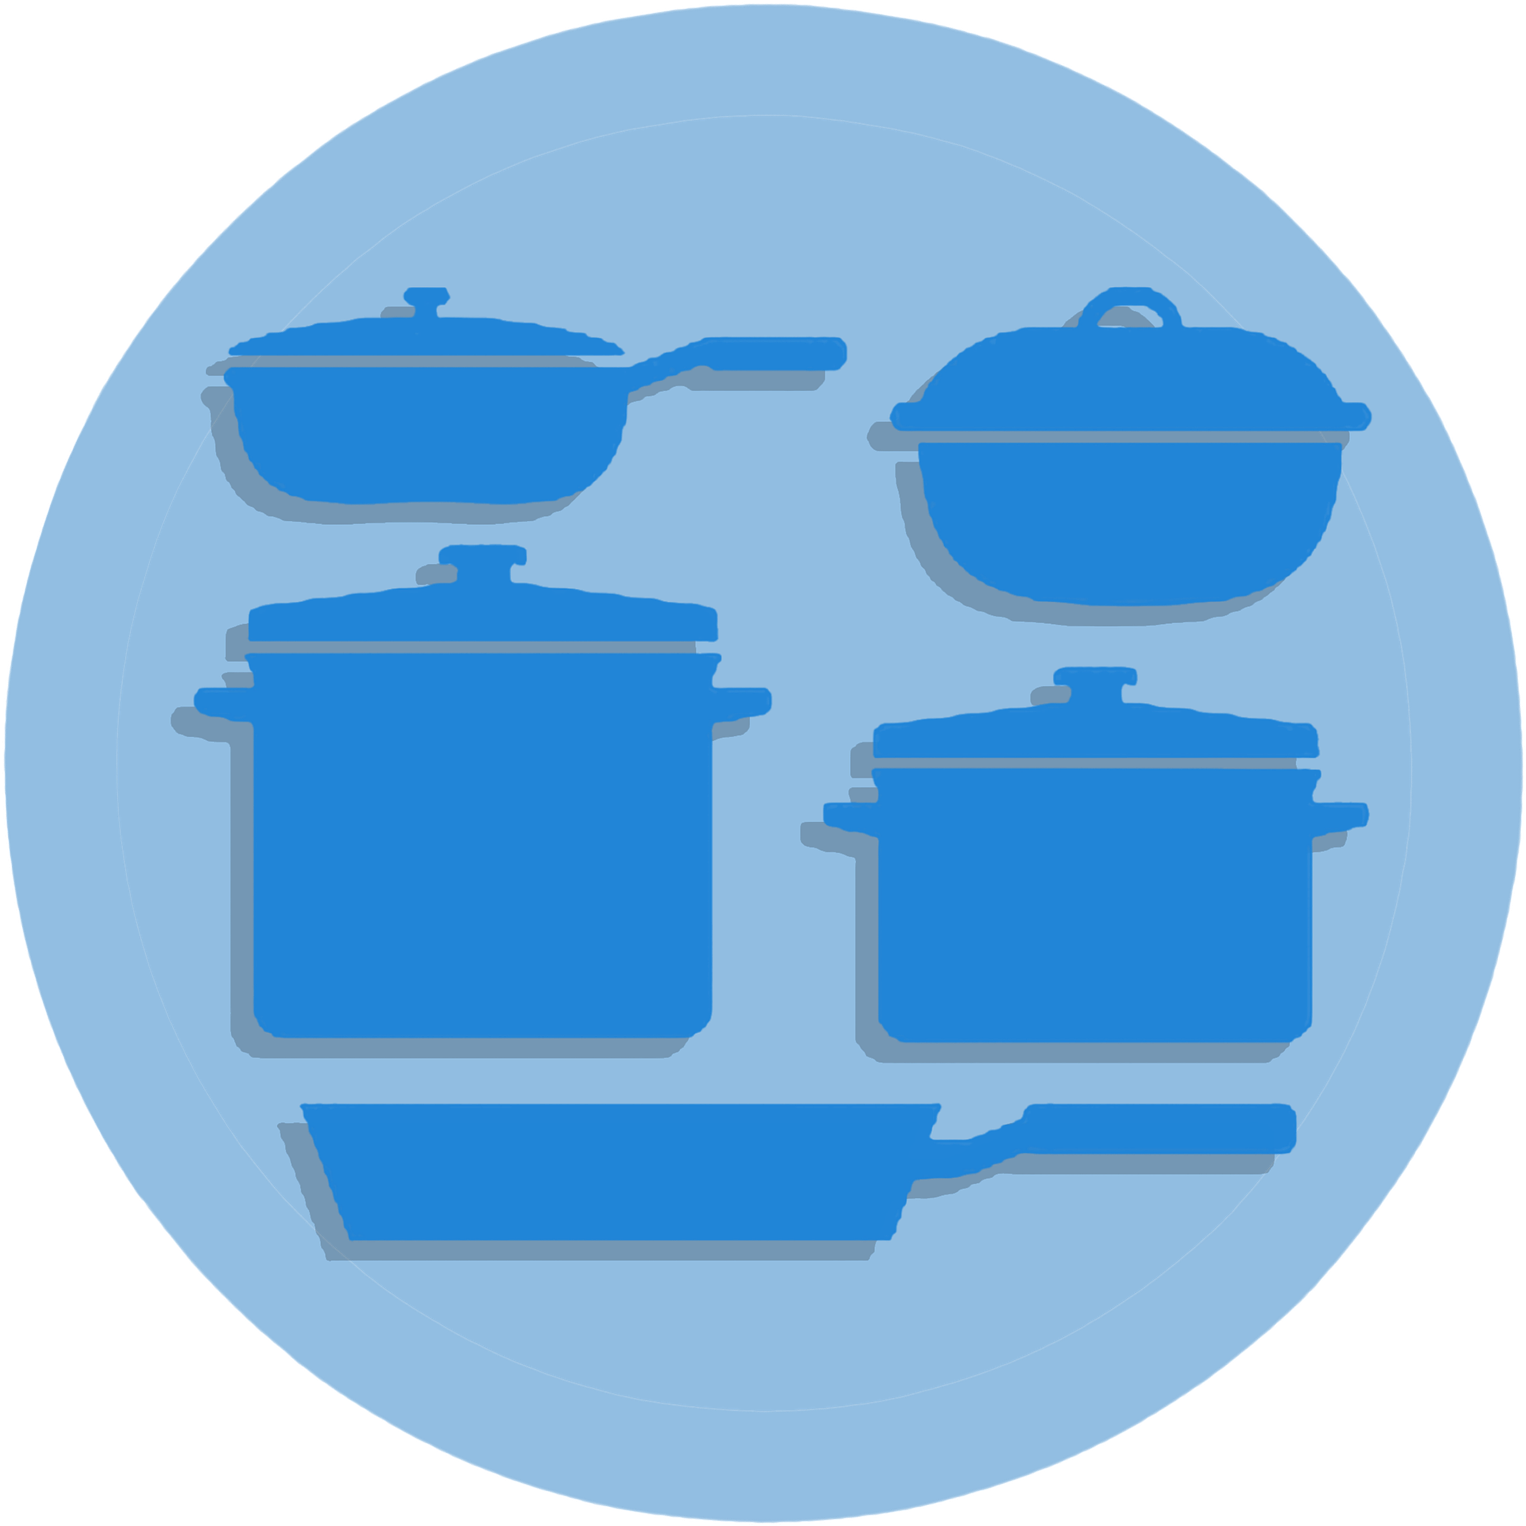 Kitchenware - Cookware And Bakeware (1920x1920)